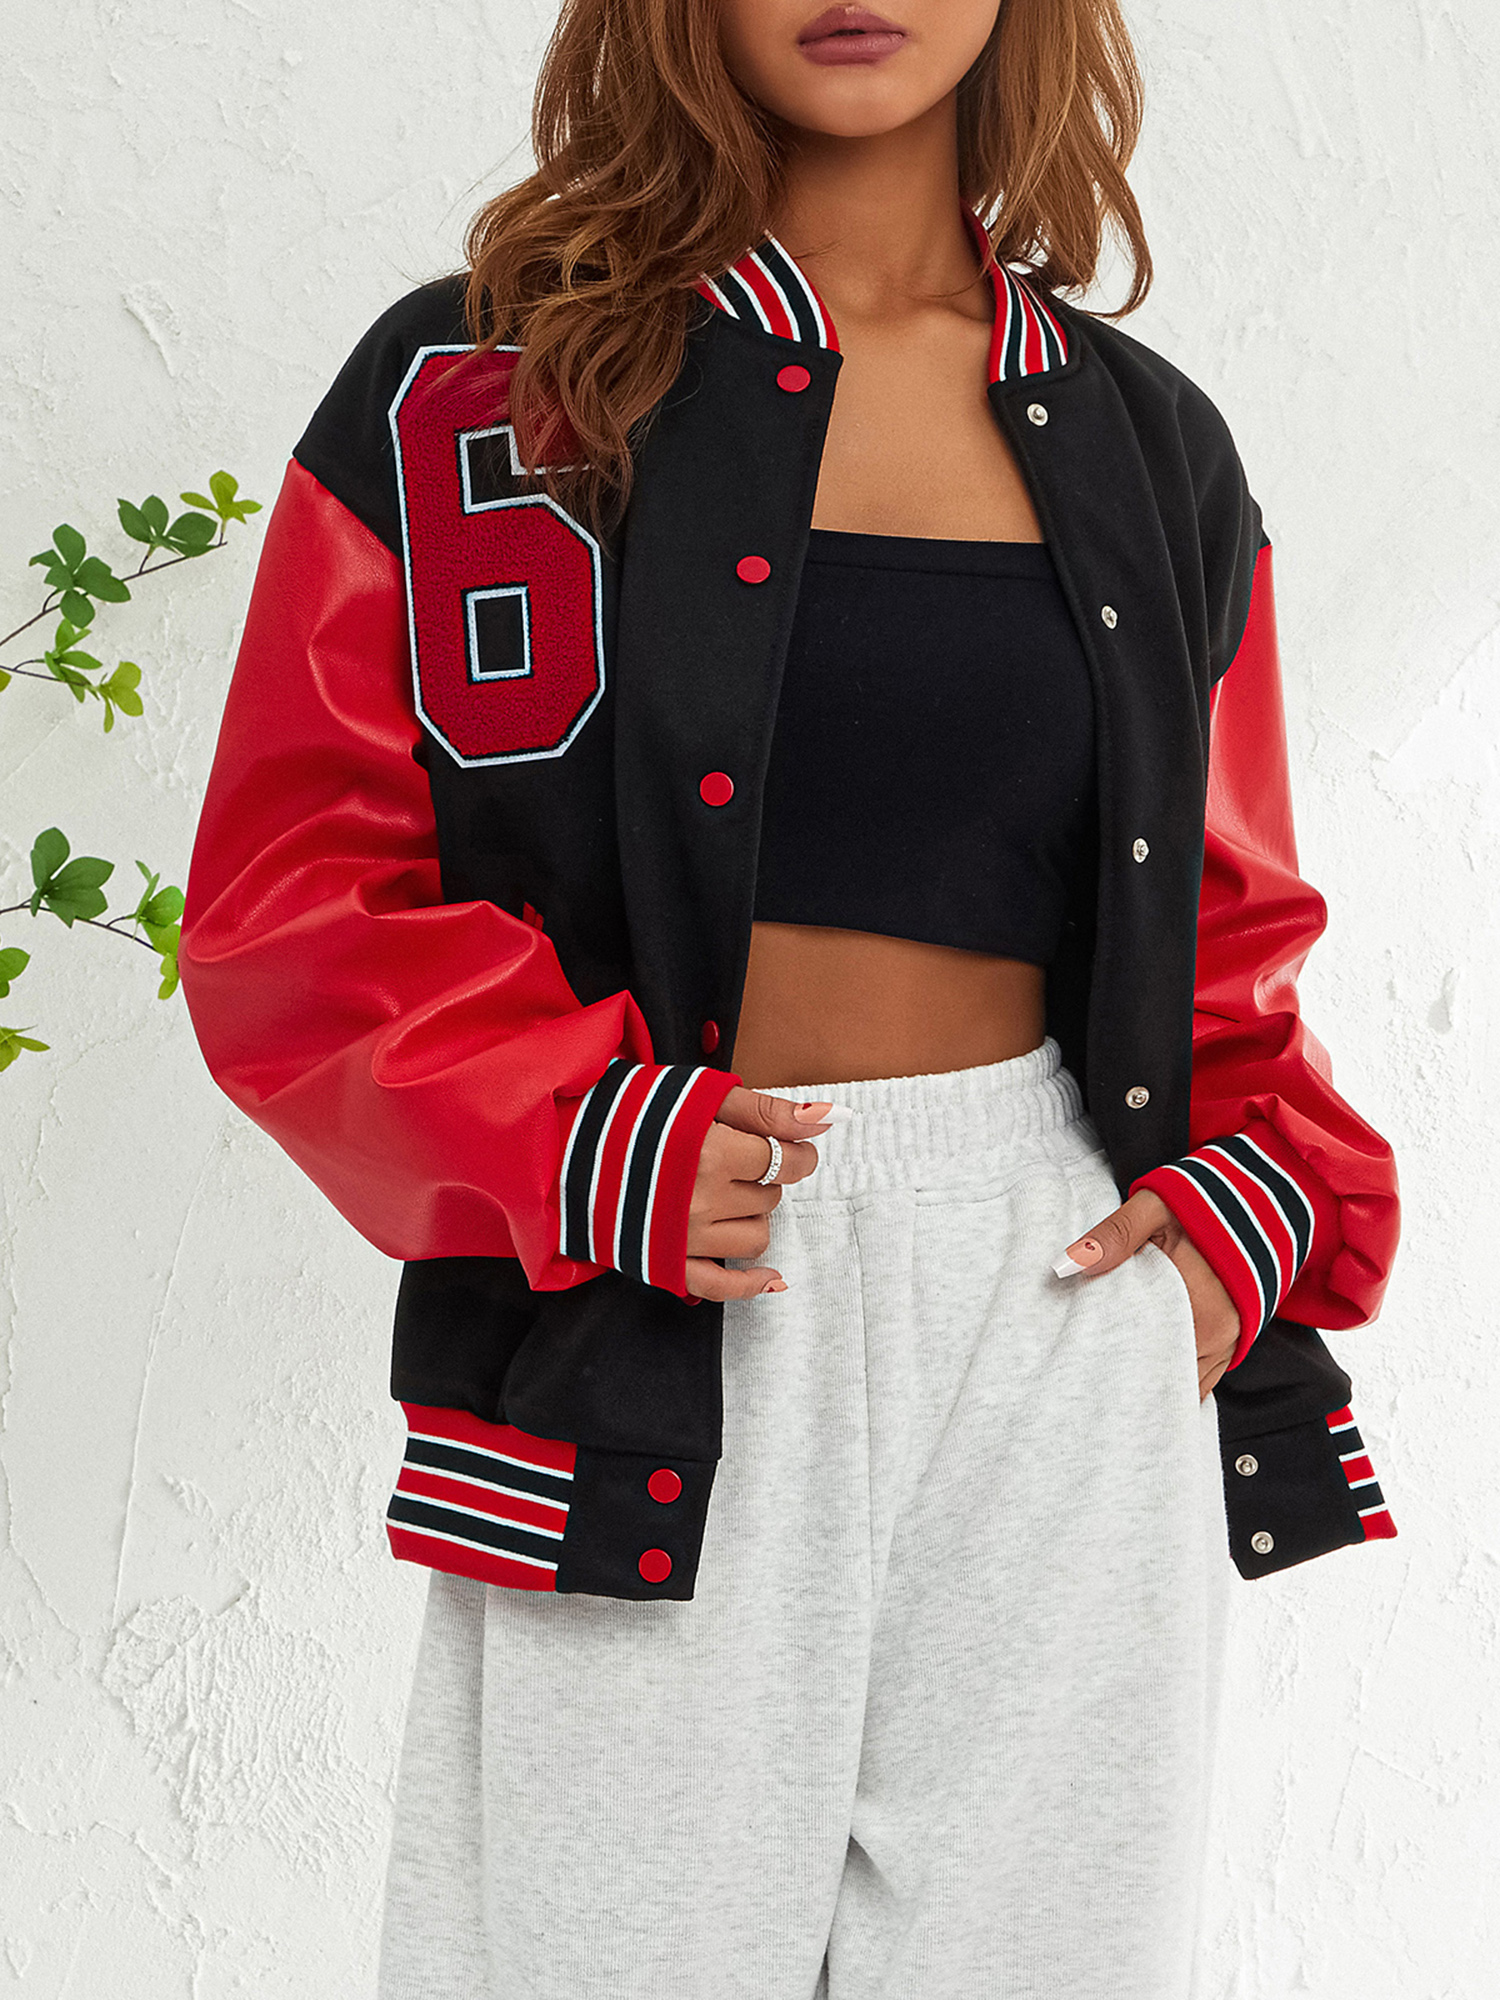 Liacowi Women Juniors Oversized Baseball Jacket Letters Print Button Bomber Jacket Long Sleeve Leather Parchwork Outwear Streetwear for Teen - image 2 of 9